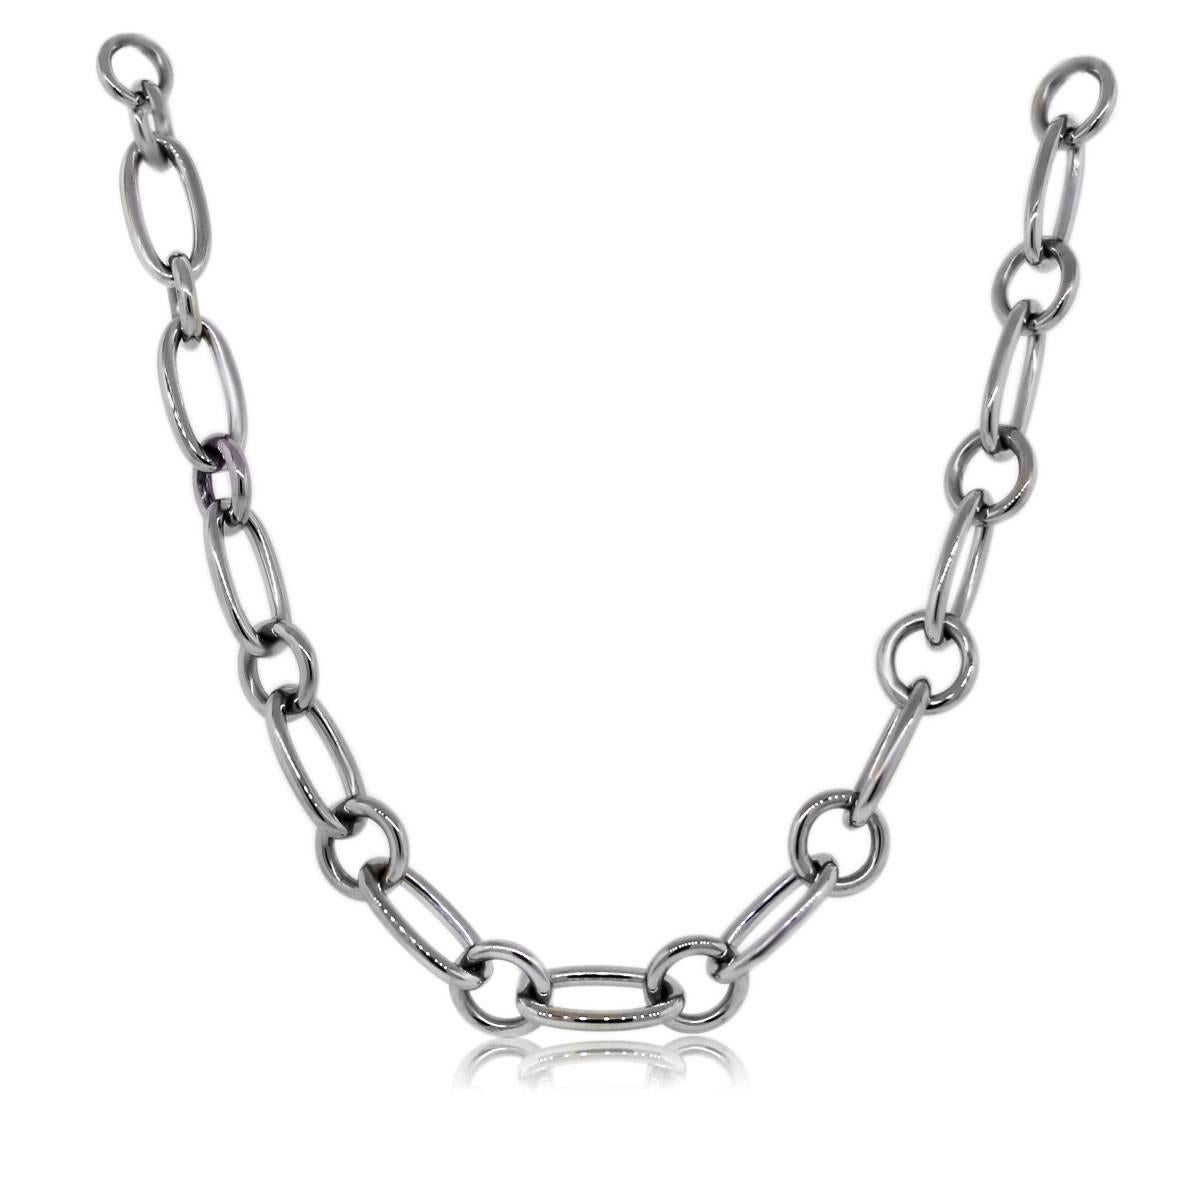 tiffany gold chain link necklace